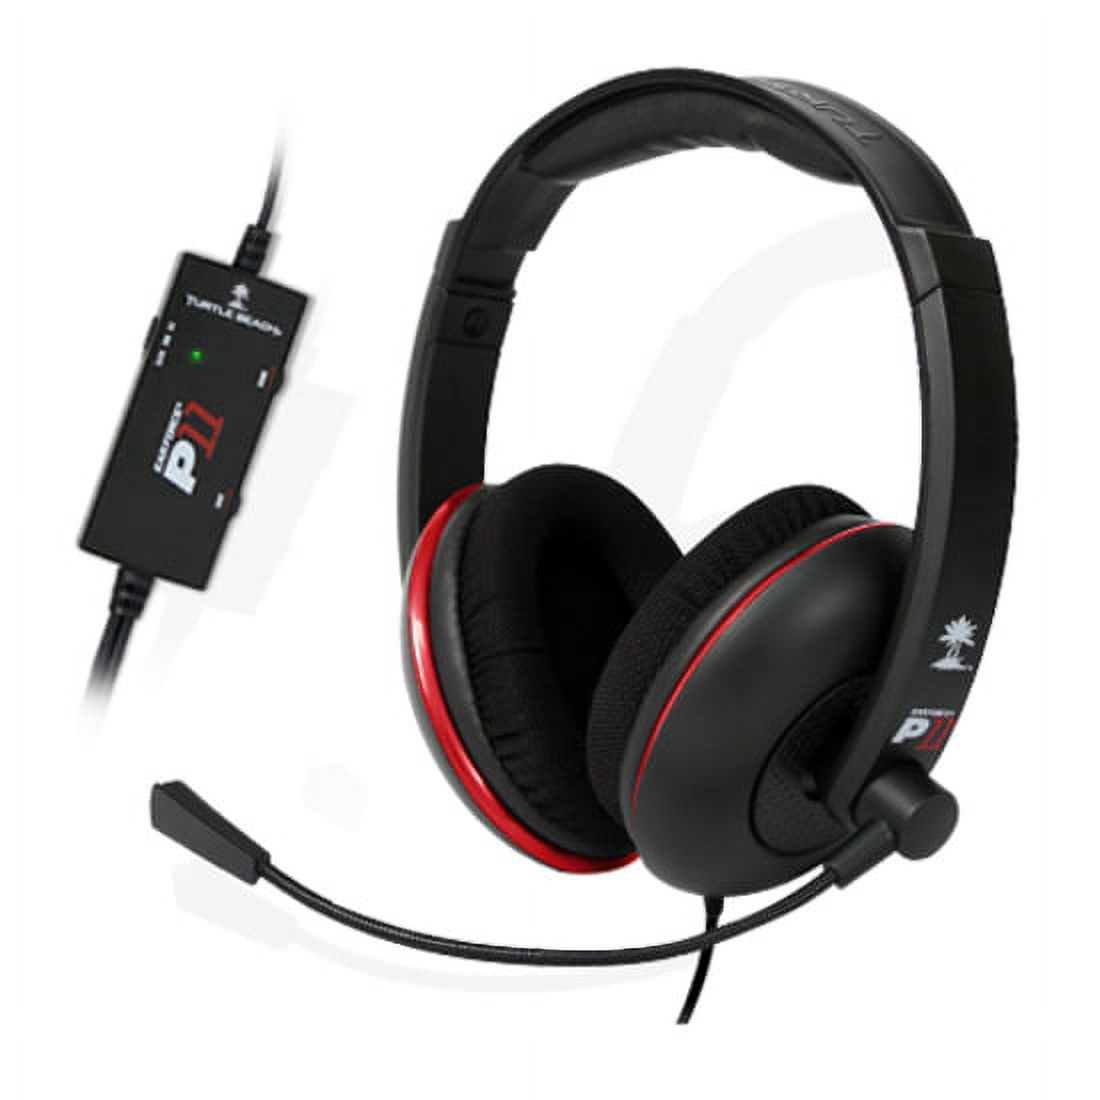 Turtle Beach Ear Force P11 Headset - image 1 of 4